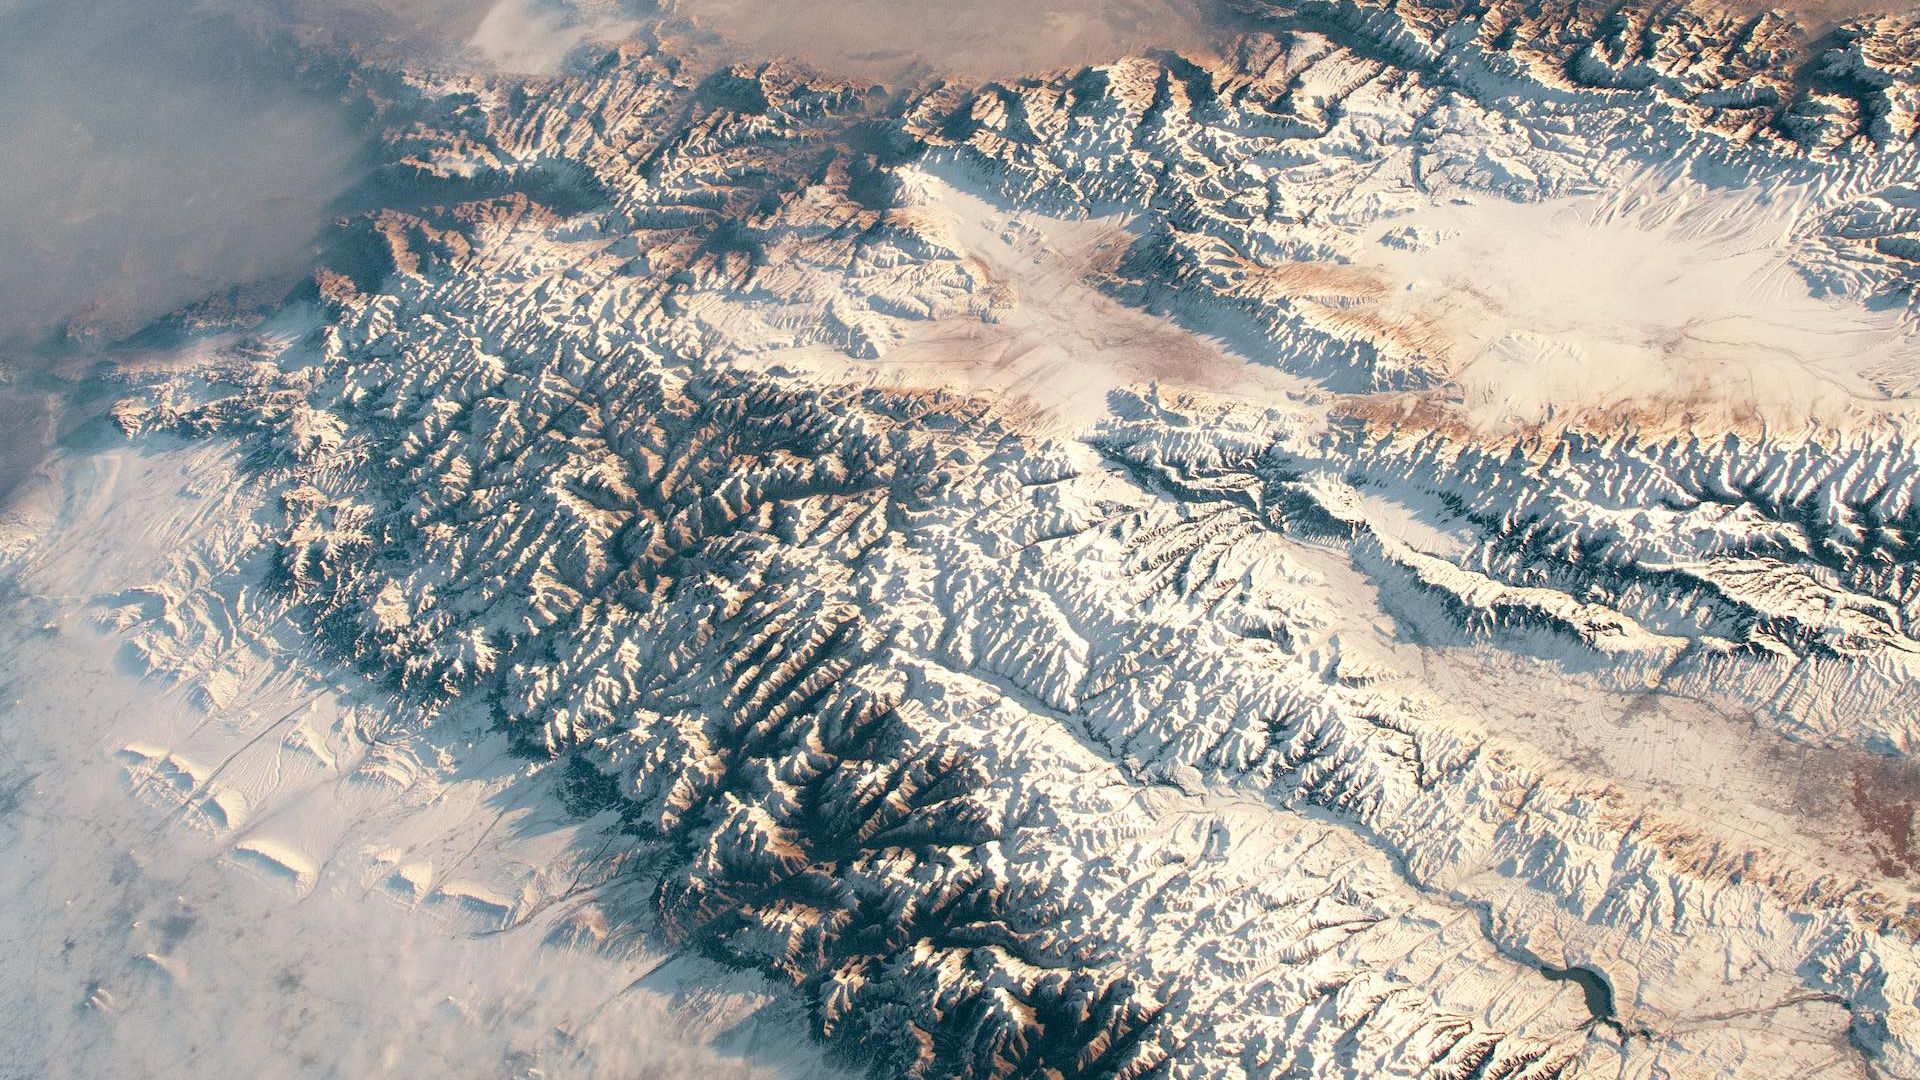 A photo of a mountain range in Asia taken from the International Space Station.